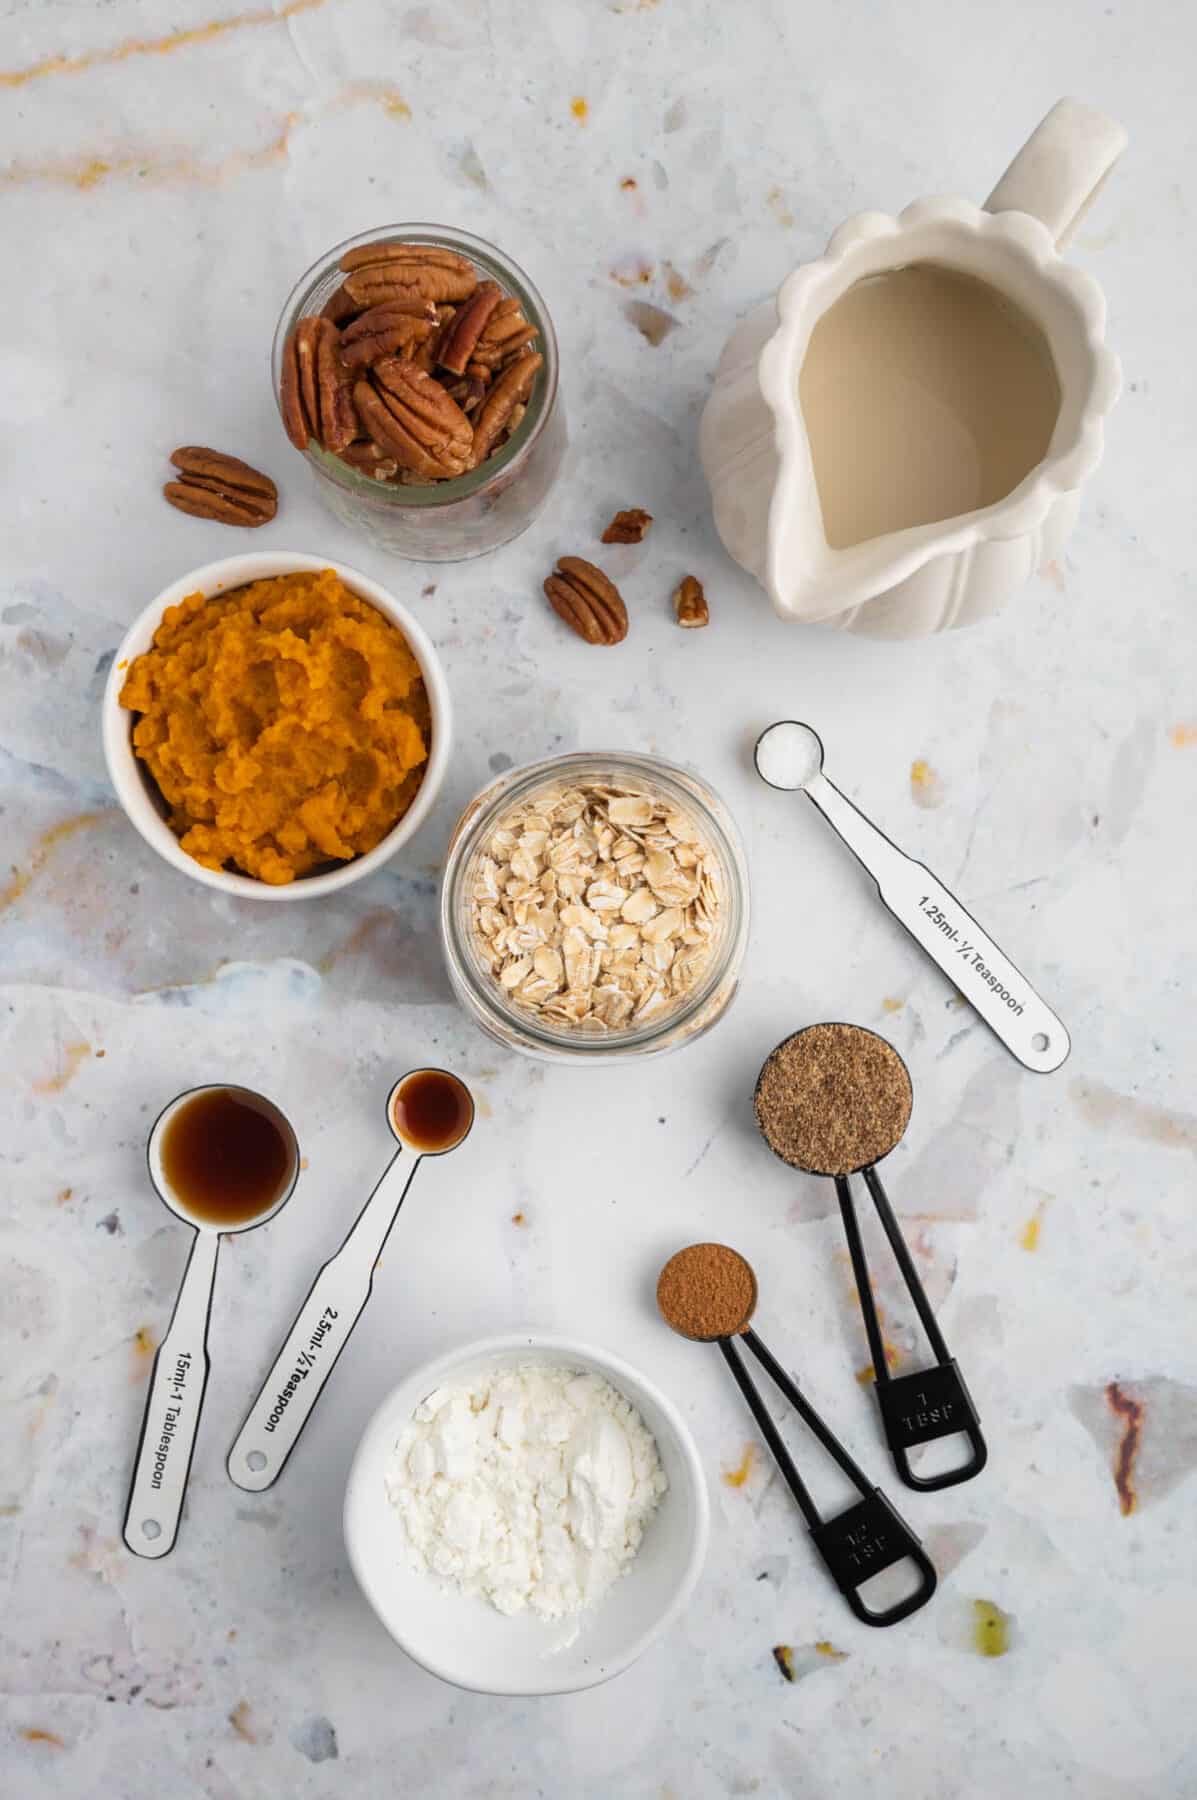 pumpkin overnight oats ingredients in small bowls and measuring cups.